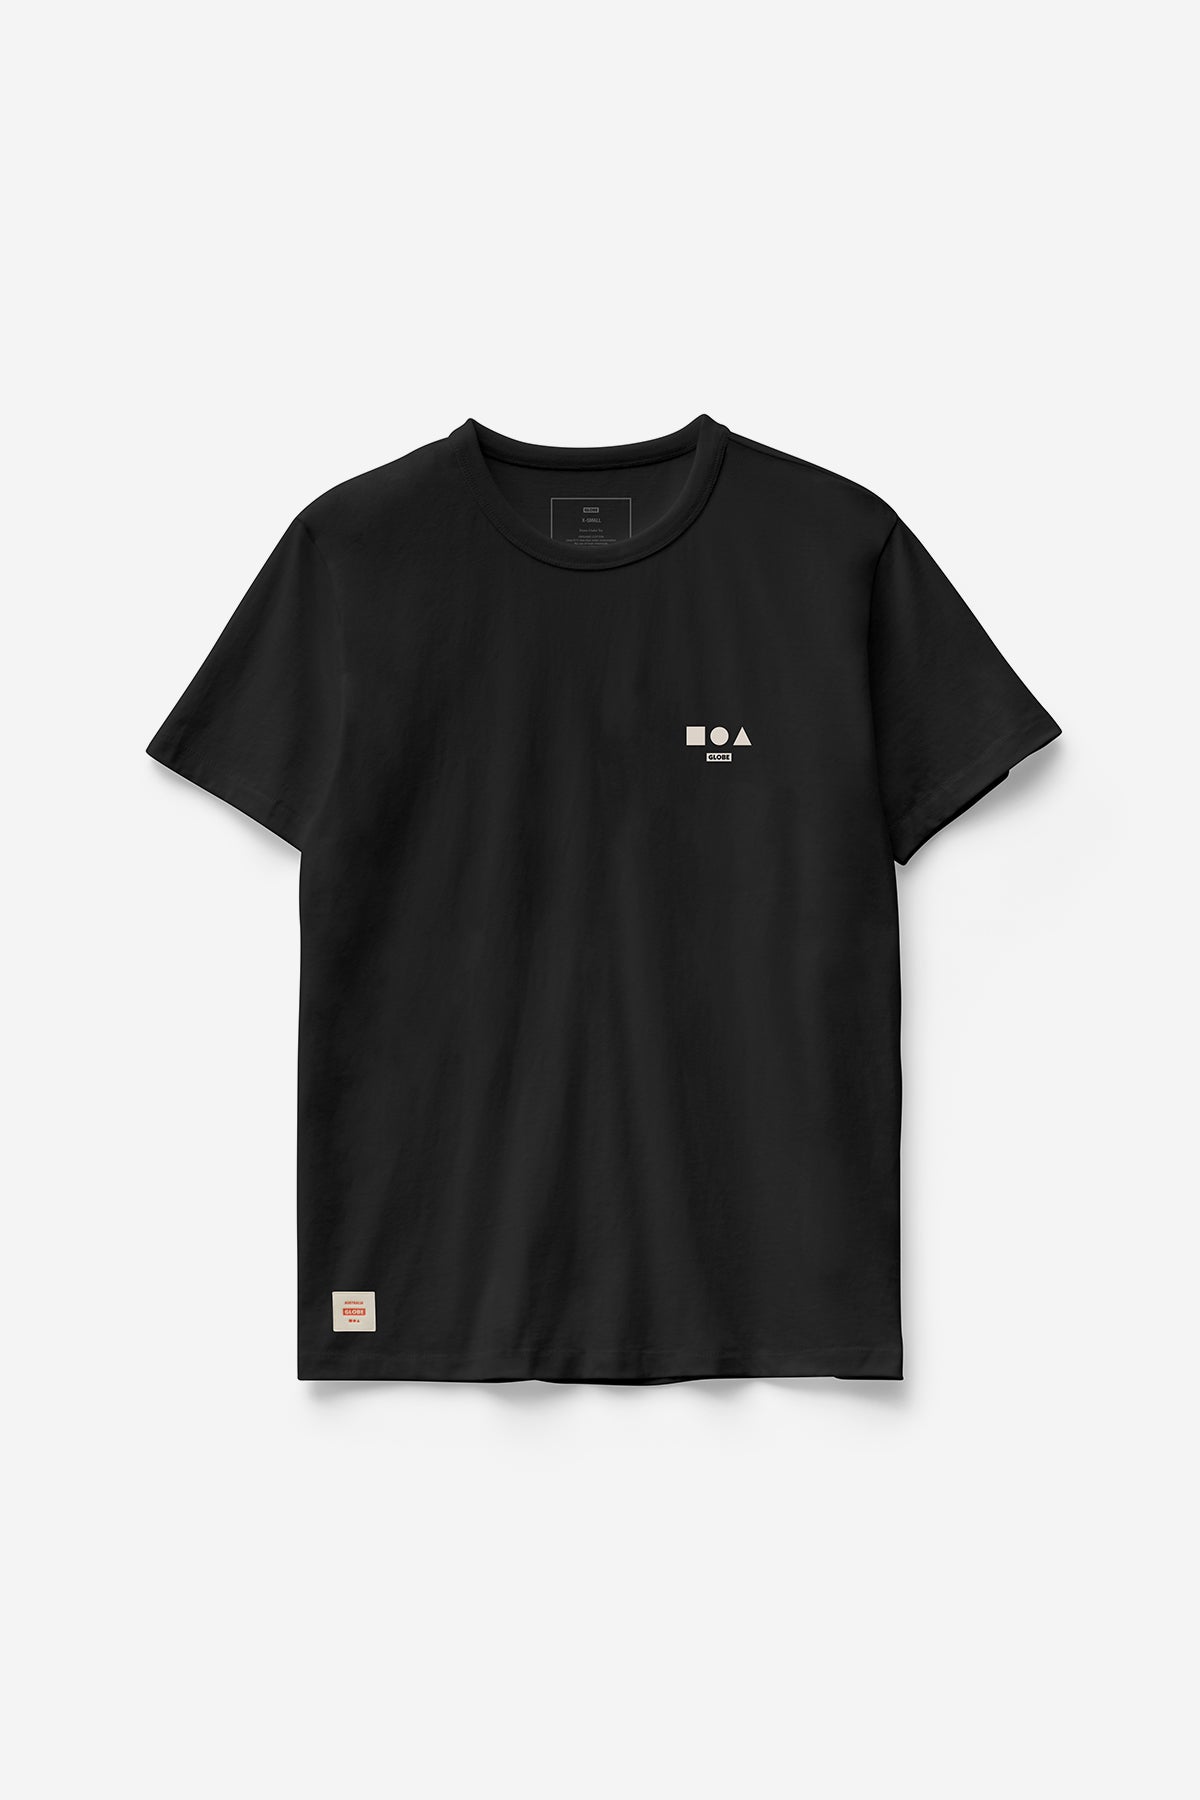 front view off body of Terrain 2 Tee - Black